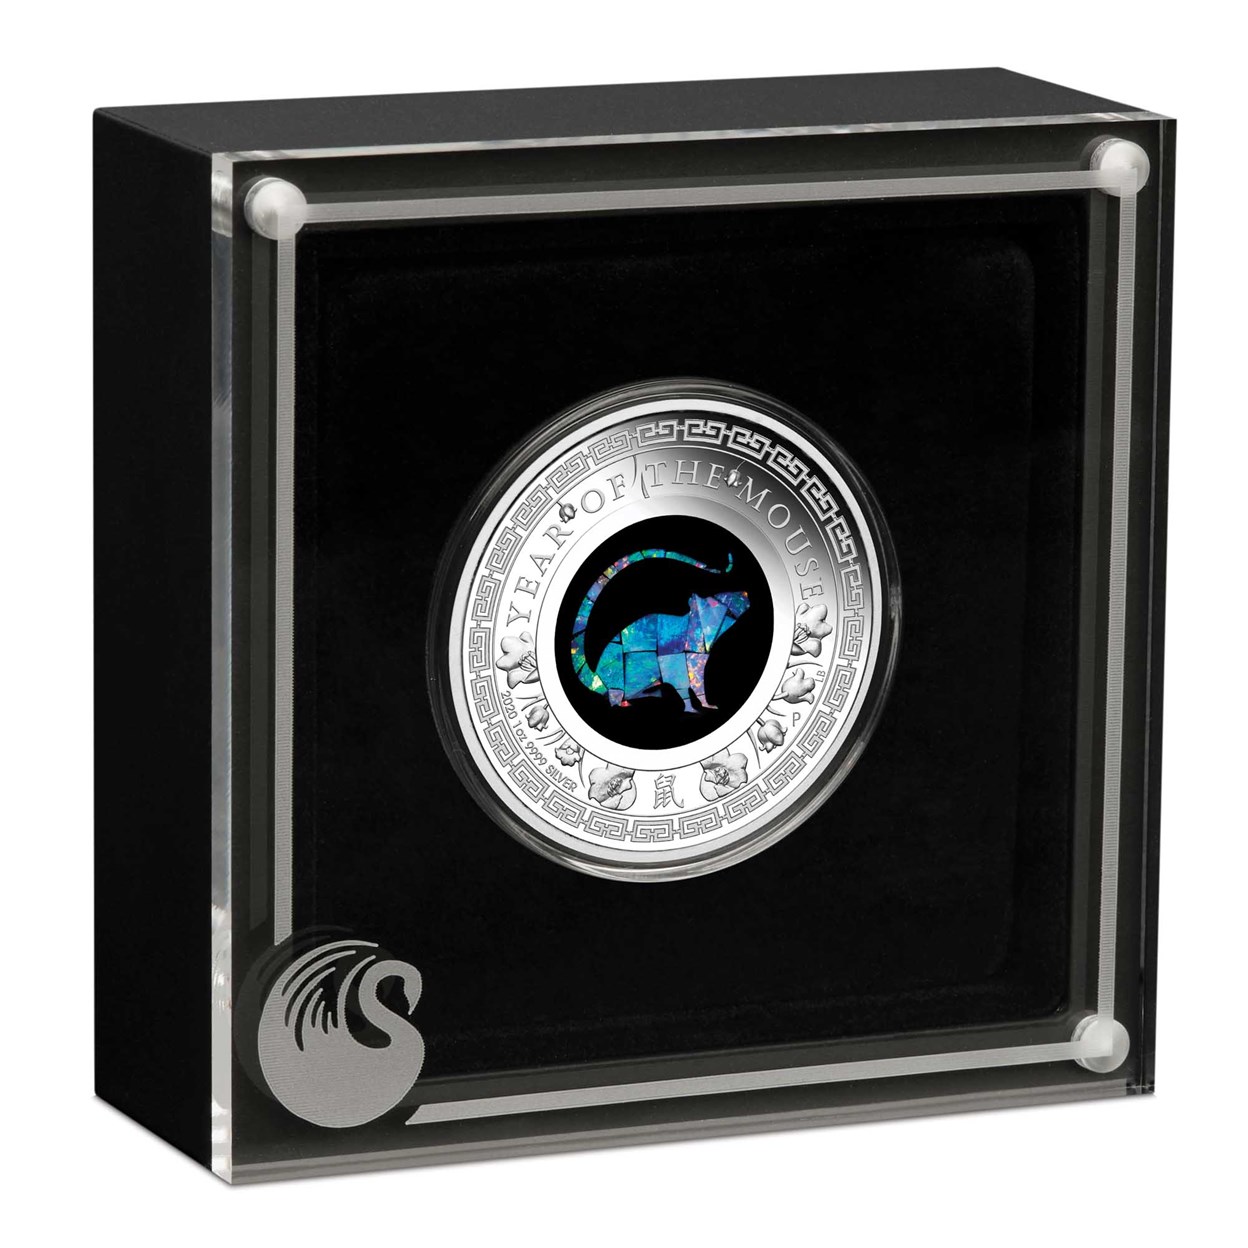 04 australian opal lunar series 2020 year of the mouse 2019 1oz silver proof InCase